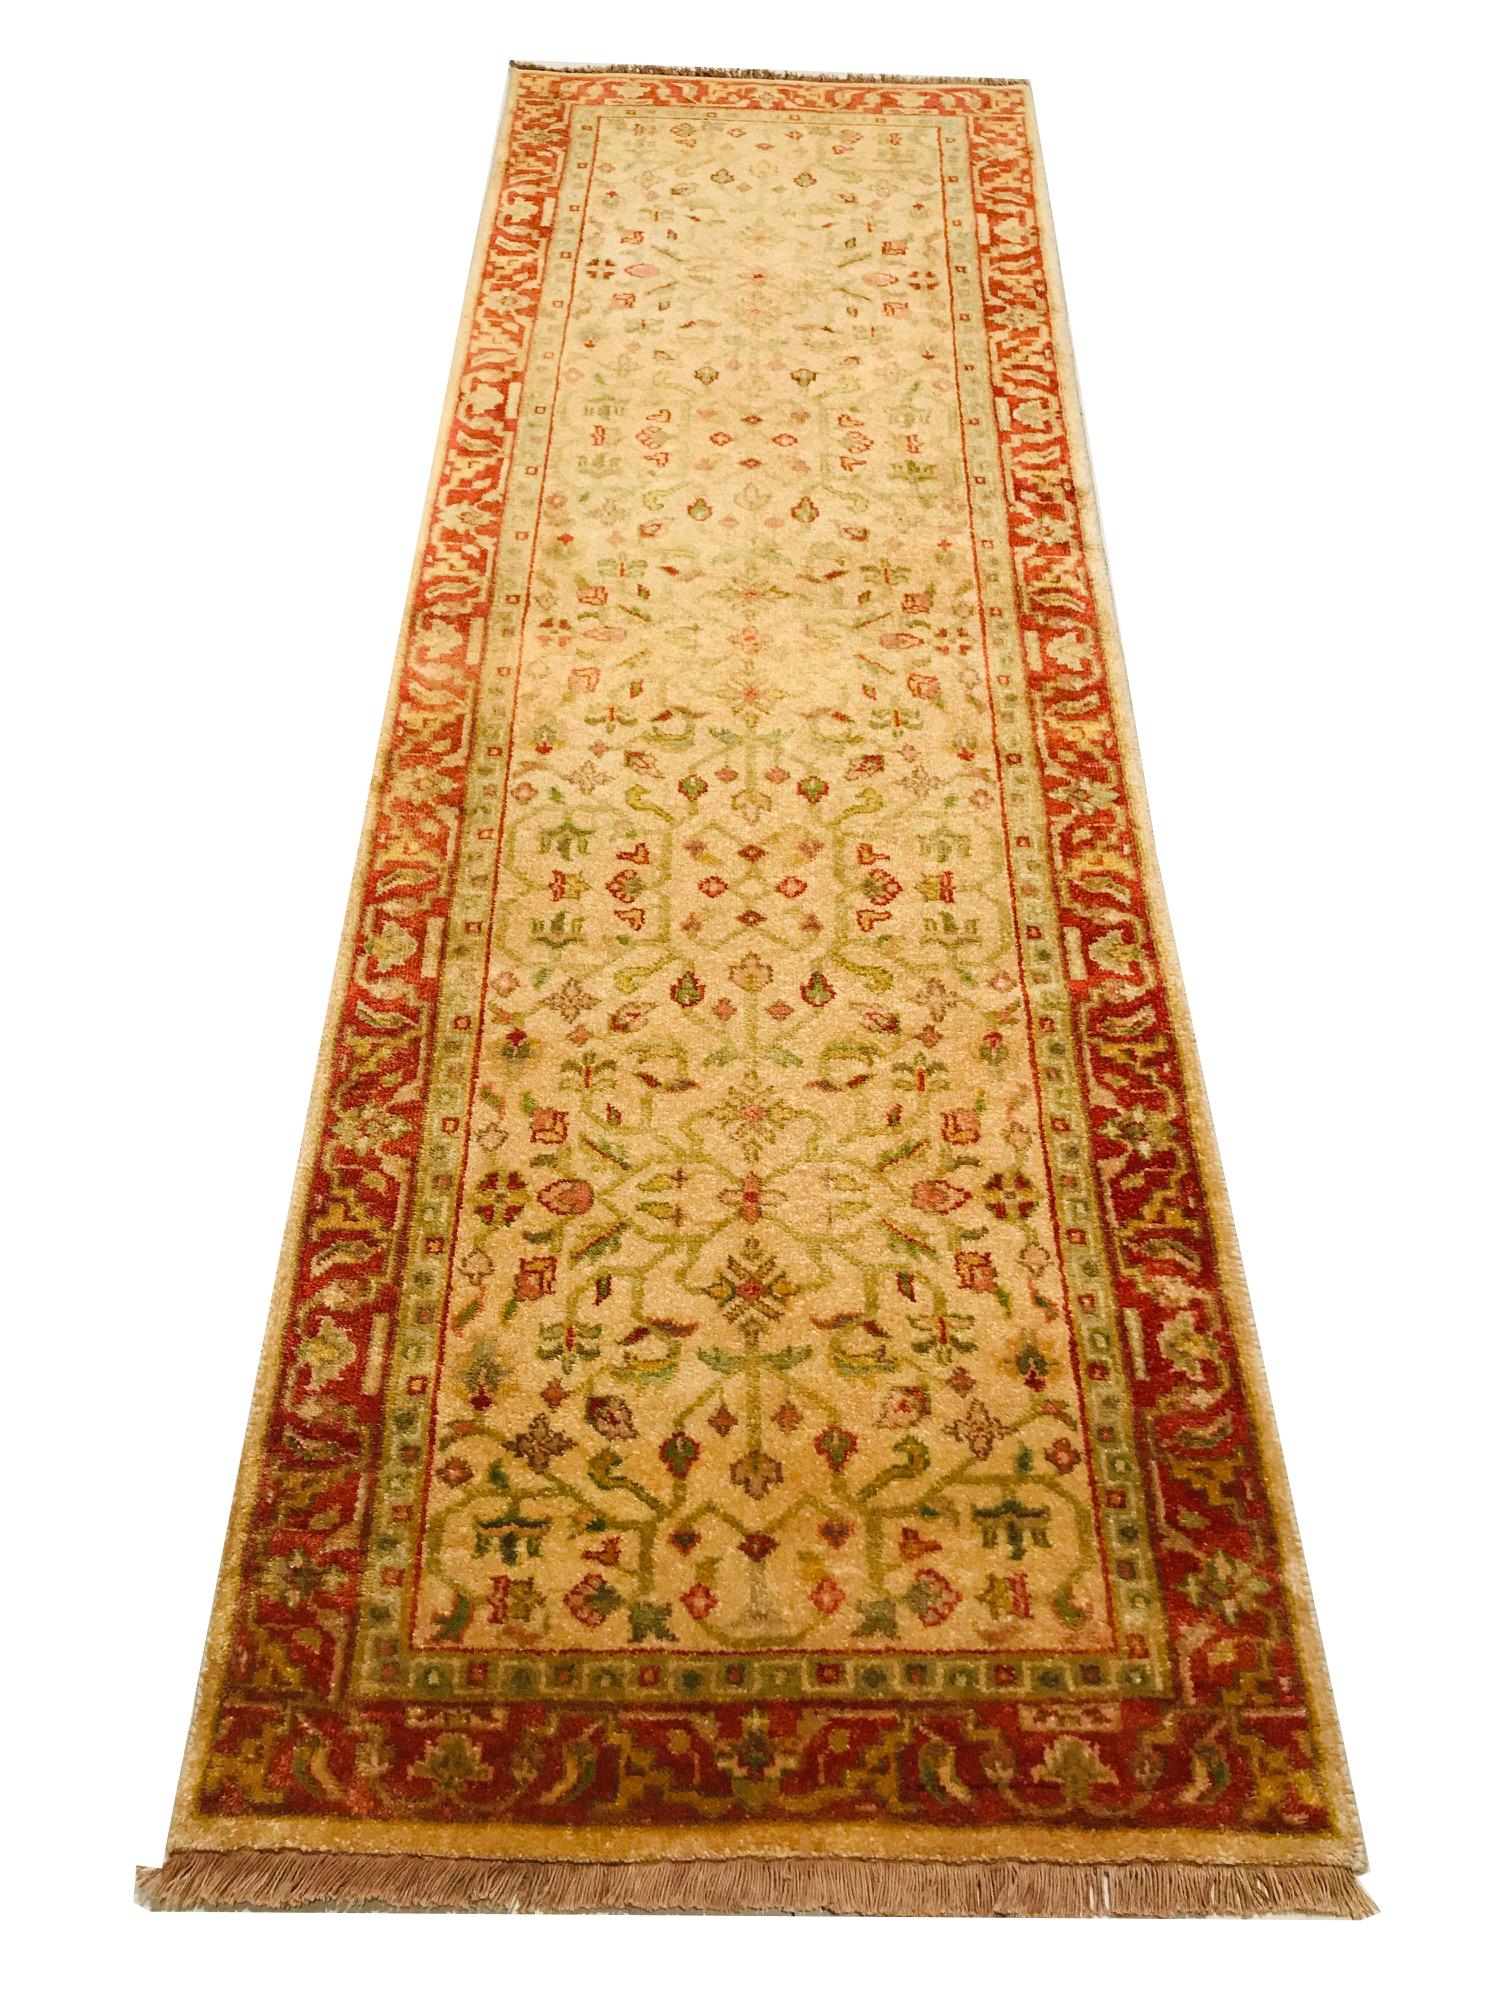 This Indian runner rug is from the 1980s, hand knotted with wool.
This runner carpet has typical drawings of this period, a combination of colors such as red, olive green and beige that makes it a perfect piece to decorate a corner of our